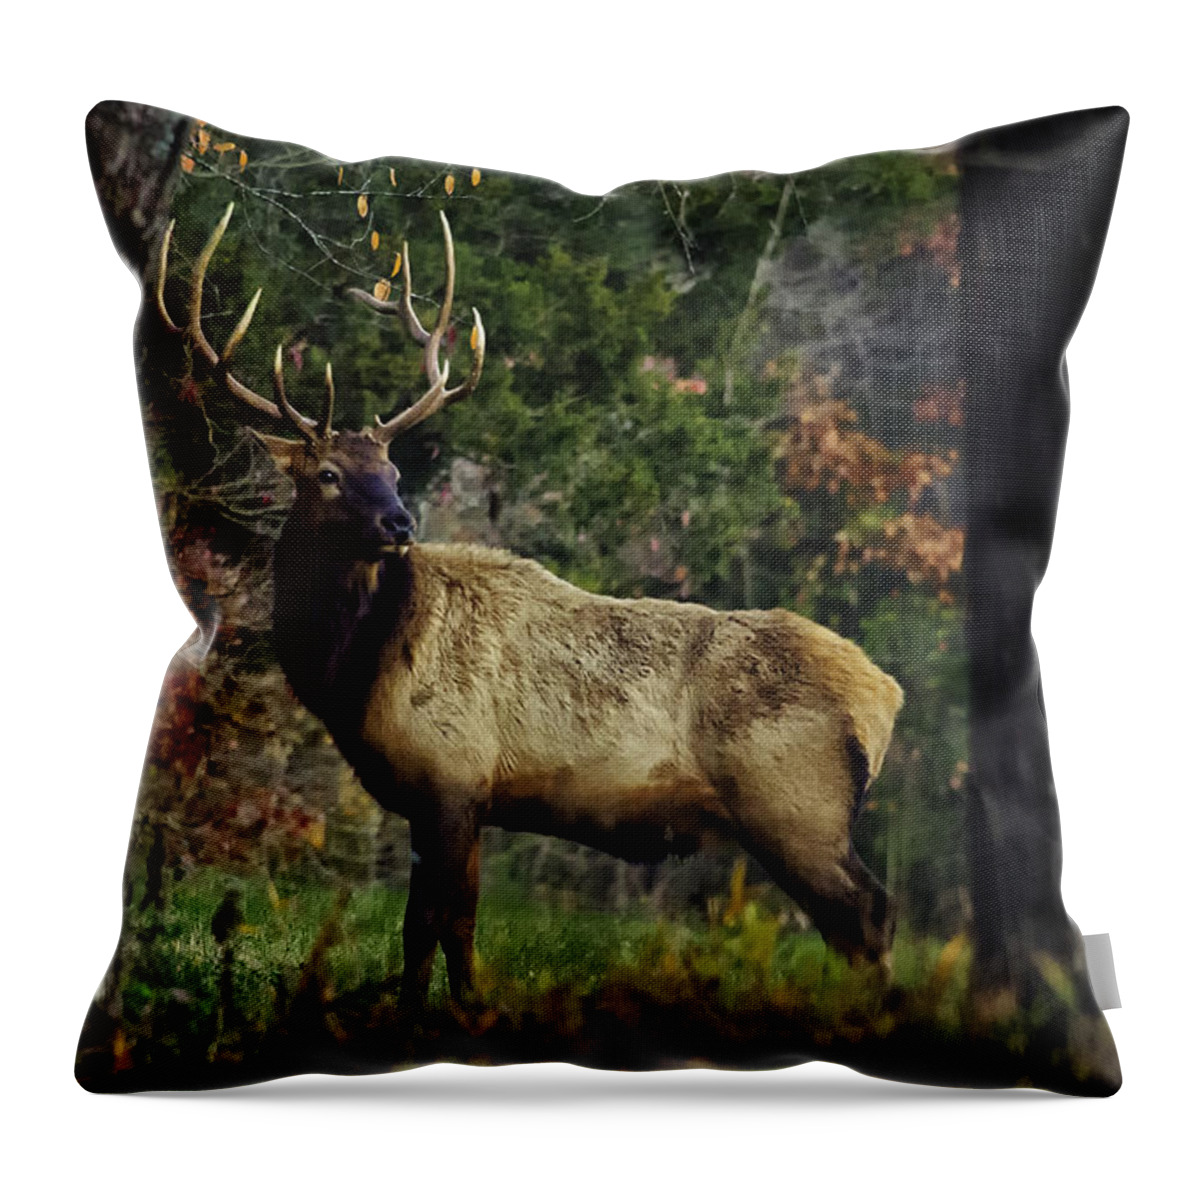 Elk Throw Pillow featuring the photograph Satellite Bull Along Tree Line by Michael Dougherty